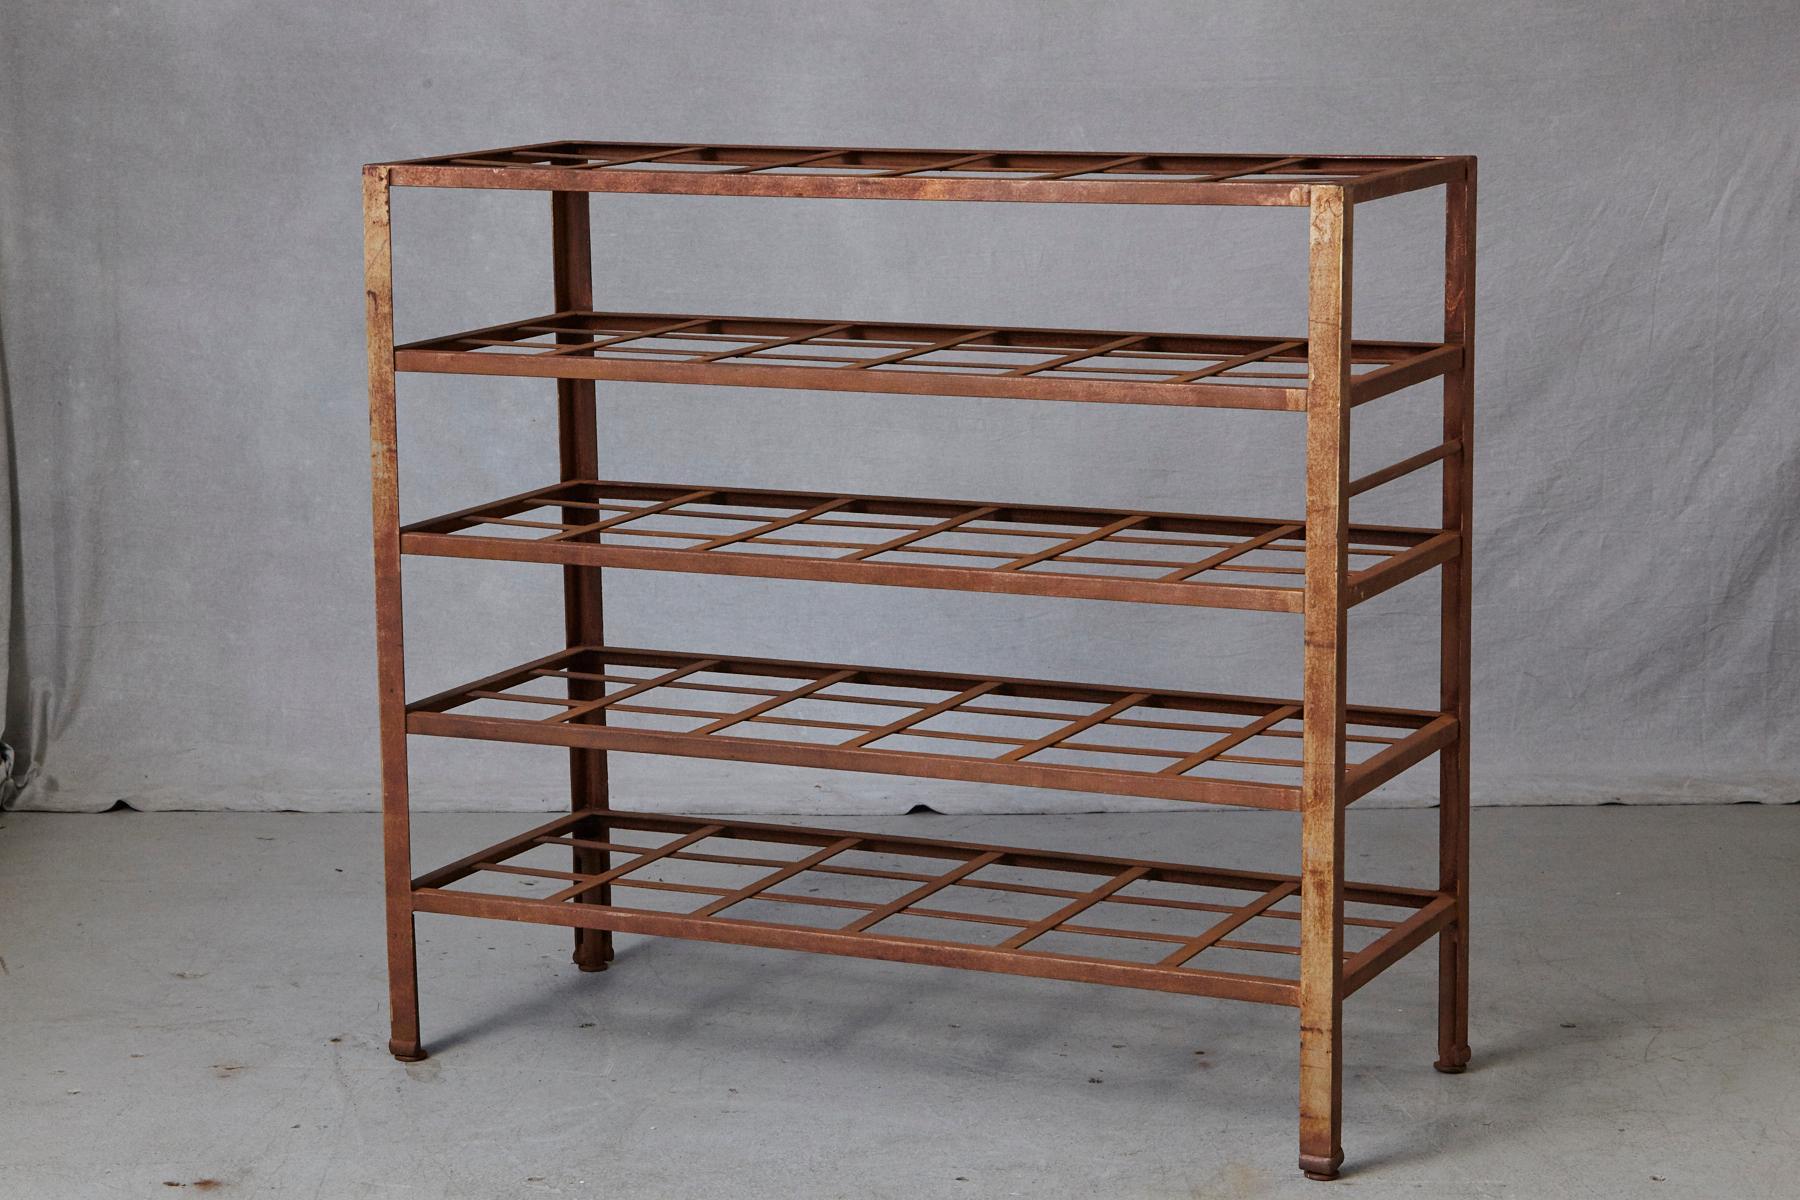 Industrial 5 Tier Shelf with Grid Shelves for Books or Usage as Seedling Planter In Good Condition For Sale In Aramits, Nouvelle-Aquitaine